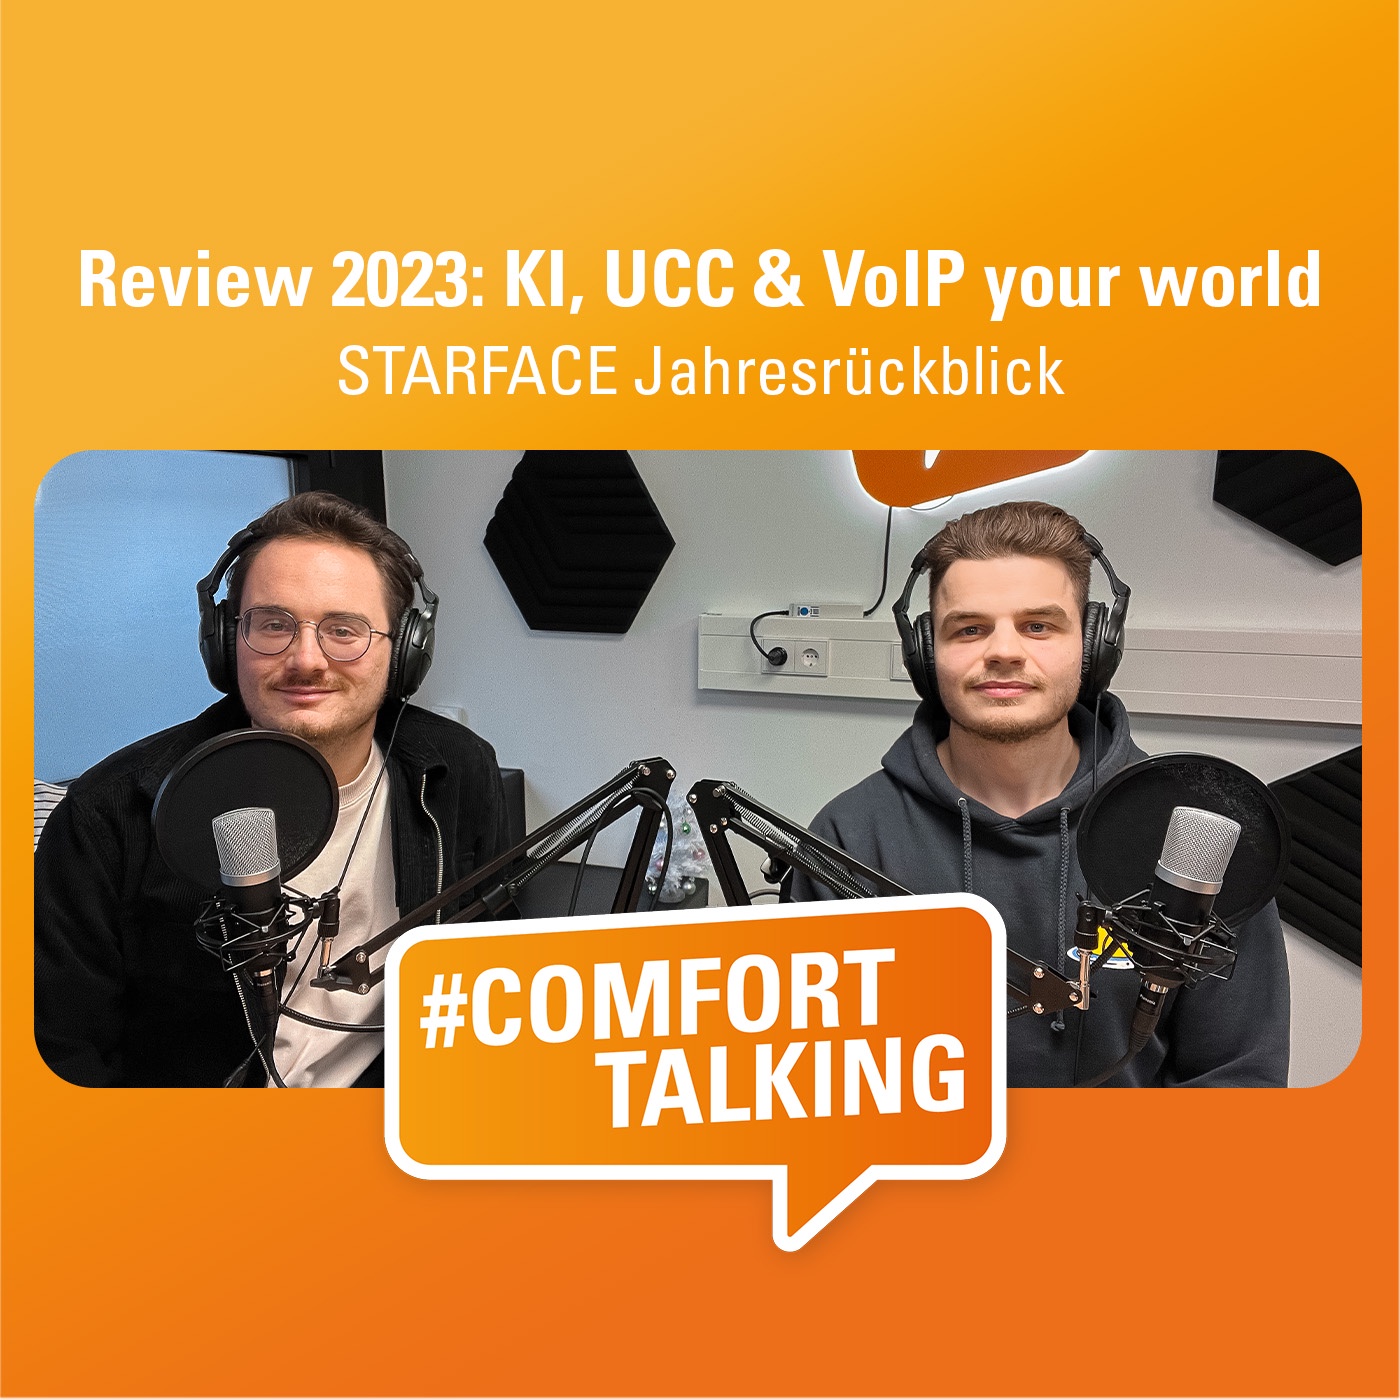 Review 2023: KI, UCC & VoIP your world